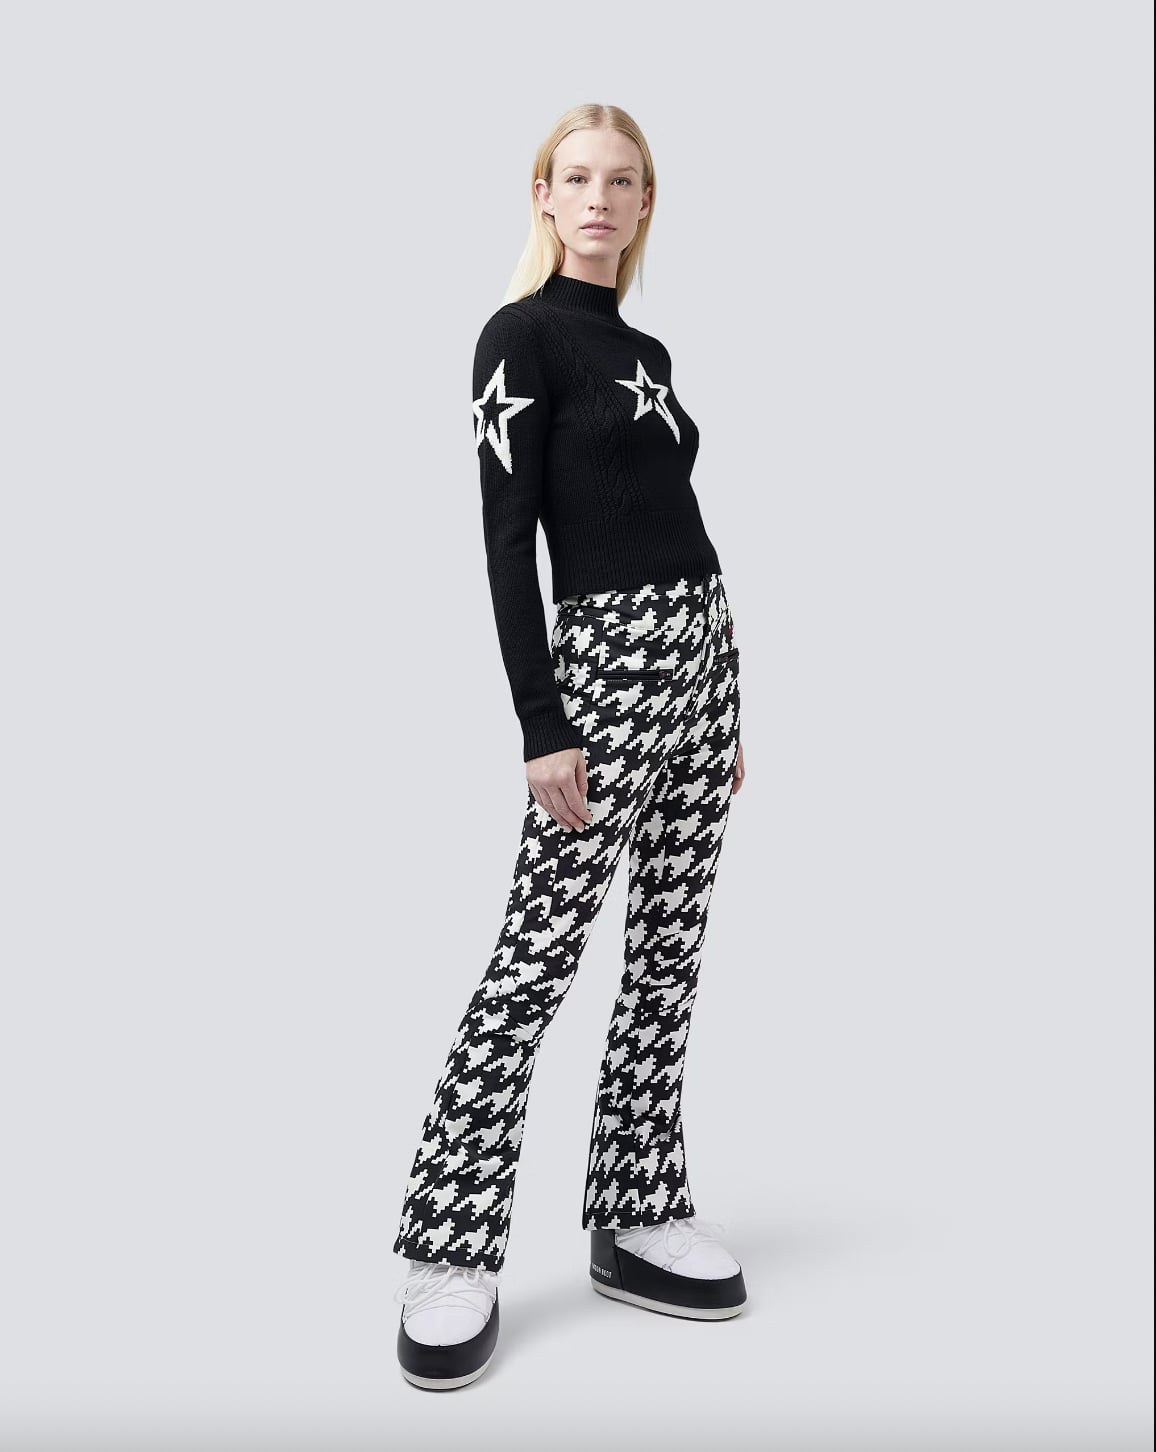 Perfect Moment Pants, Emma Roberts's Houndstooth Set Is What Chanel  Oberlin Would Wear to Go Skiing